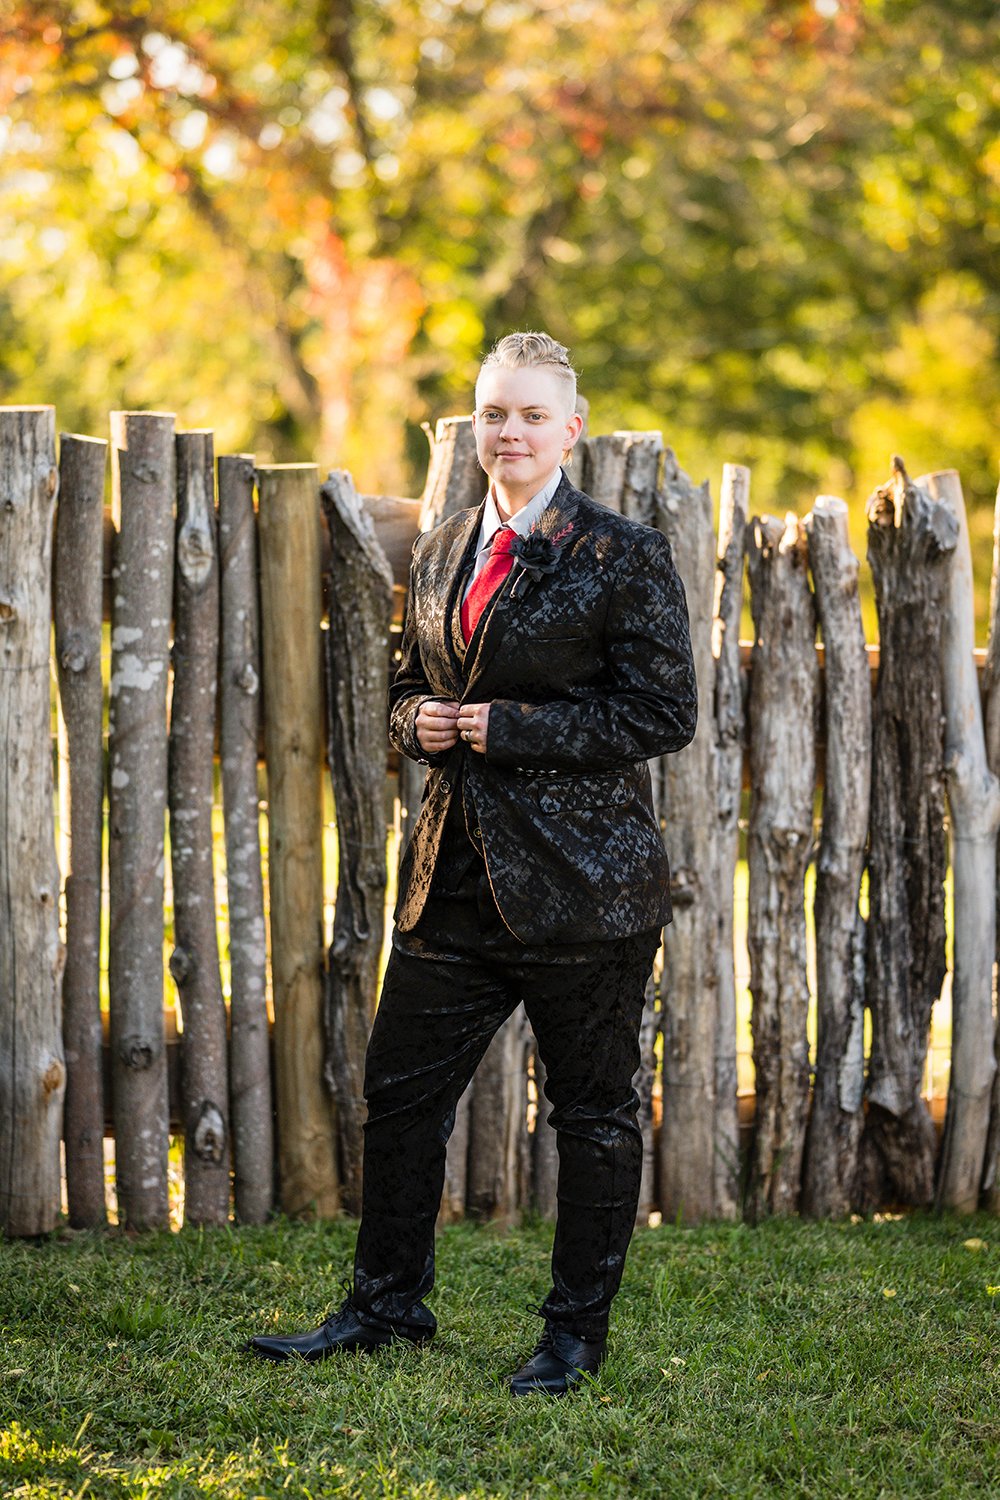 A lesbian bride wears a black floral suit and stands against a wooden log fence in the yard during their elopement.